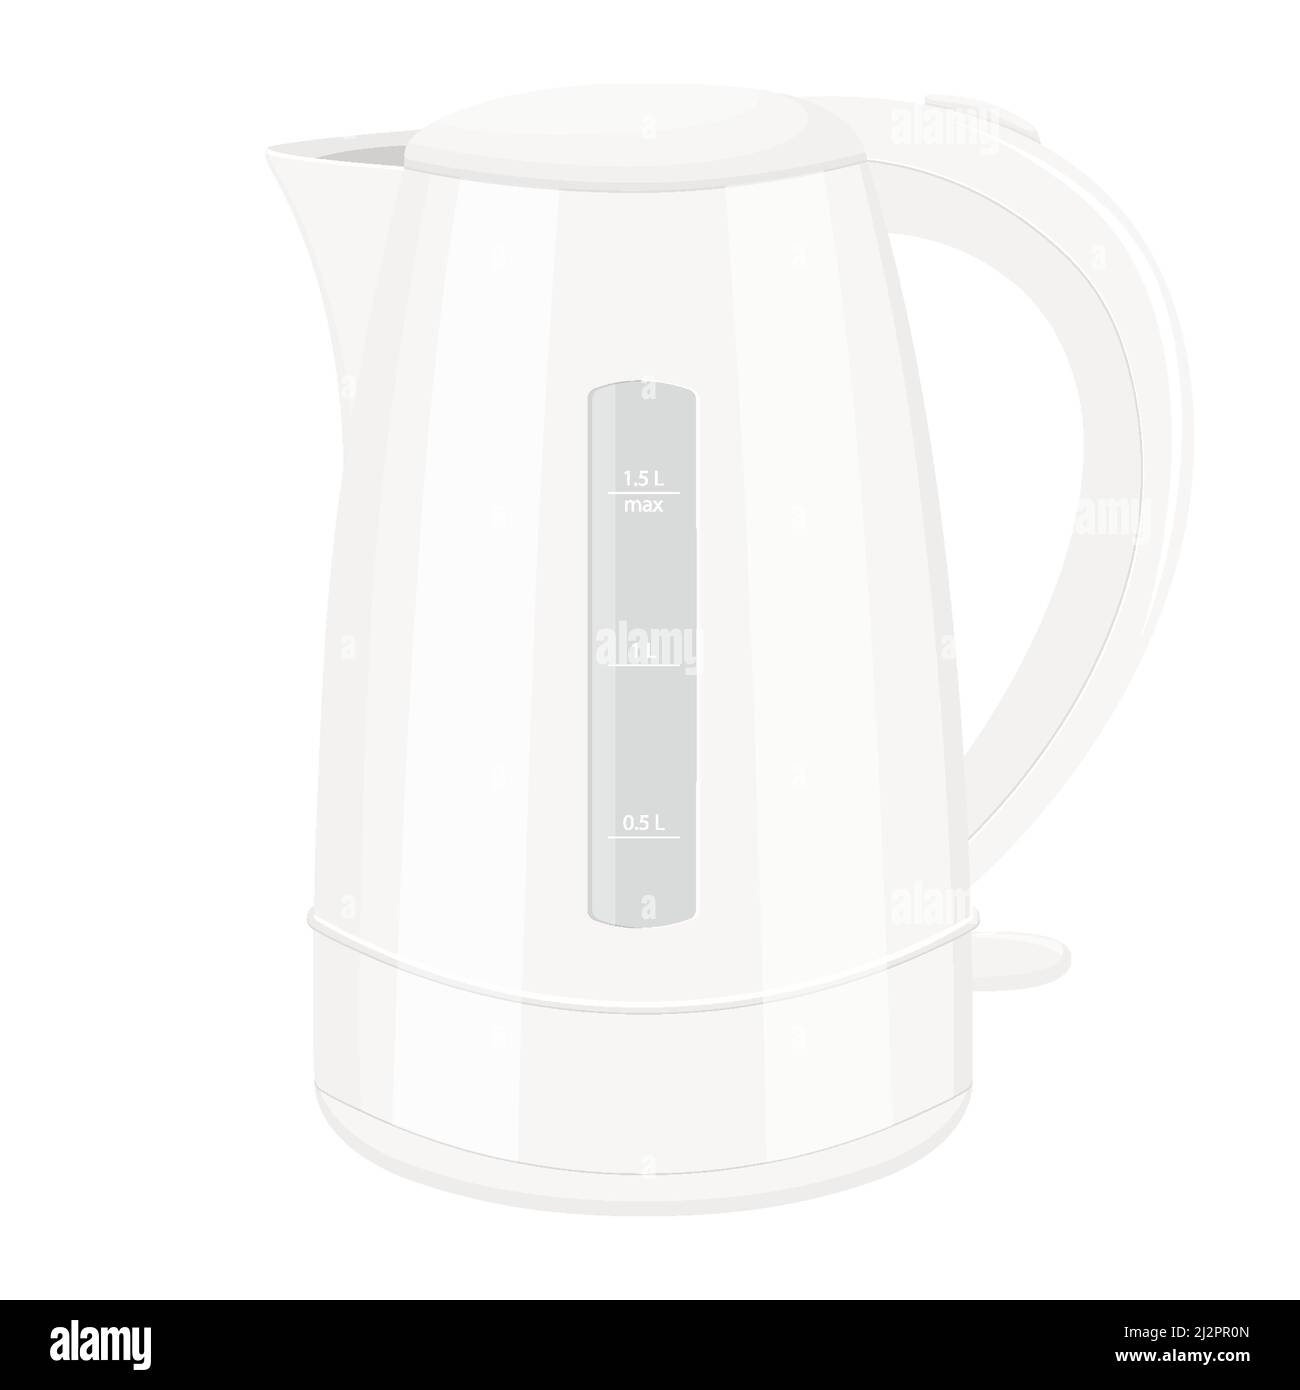 https://c8.alamy.com/comp/2J2PR0N/realistic-electric-white-kettle-isolated-vector-illustration-on-white-background-teapot-electric-kettle-for-home-use-in-the-kitchen-for-boiling-wa-2J2PR0N.jpg